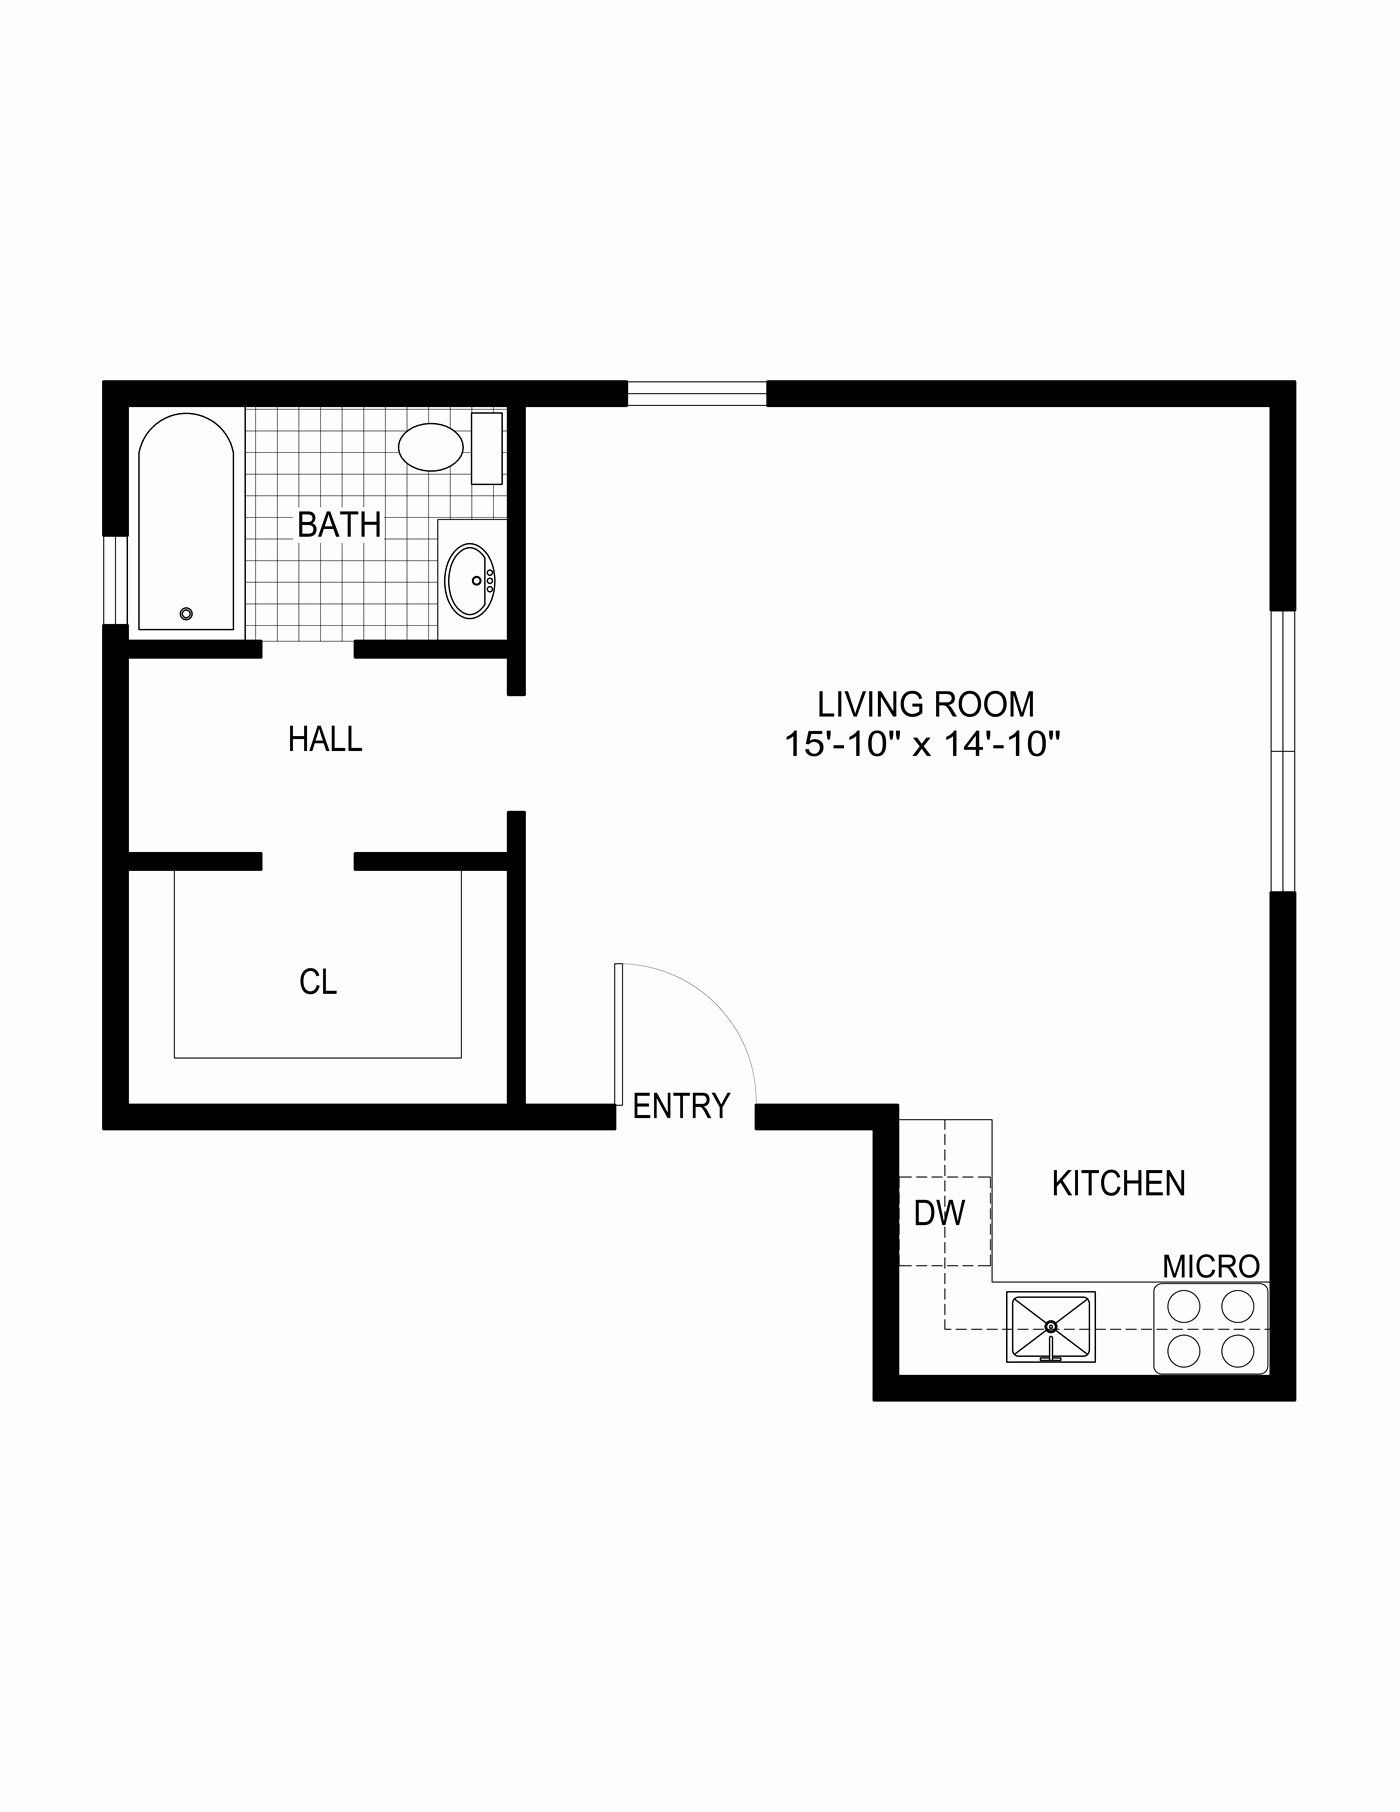 Floor Plan Templates Free Elegant 21 Awesome Fice Furniture Templates for Floor Plans